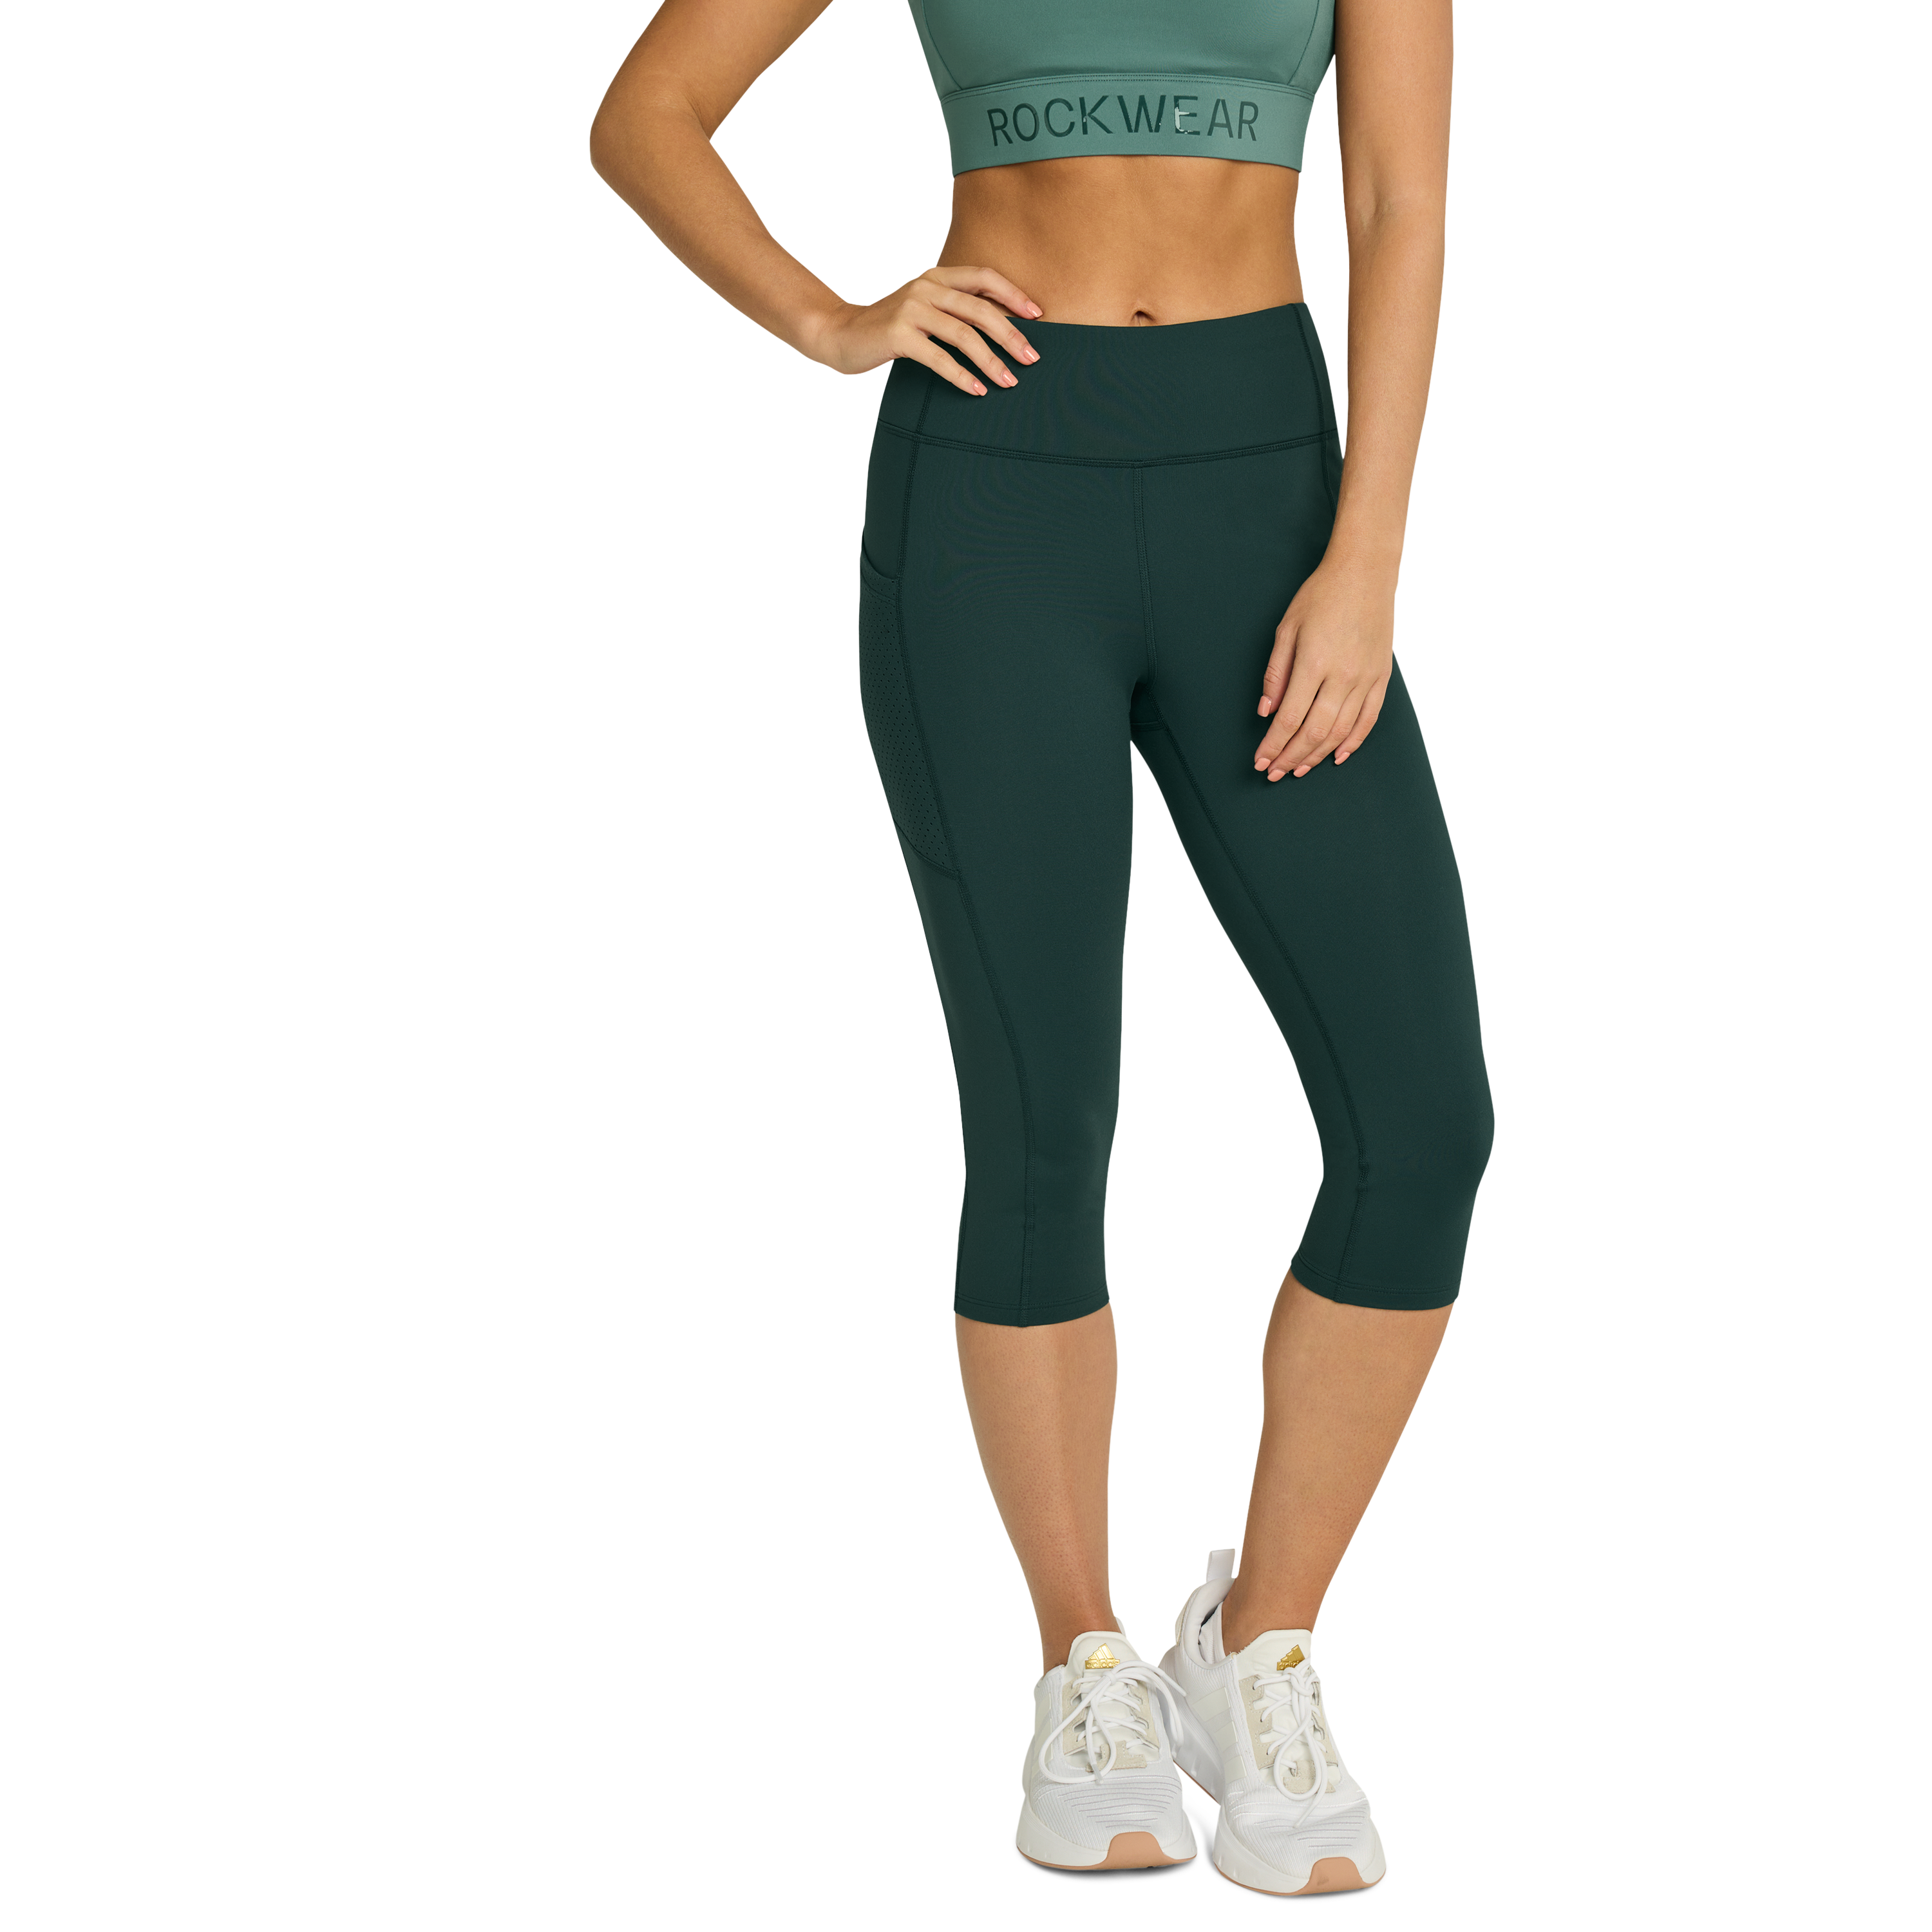 Women's Activewear Brand & Workout Gym Clothing - Running Bare